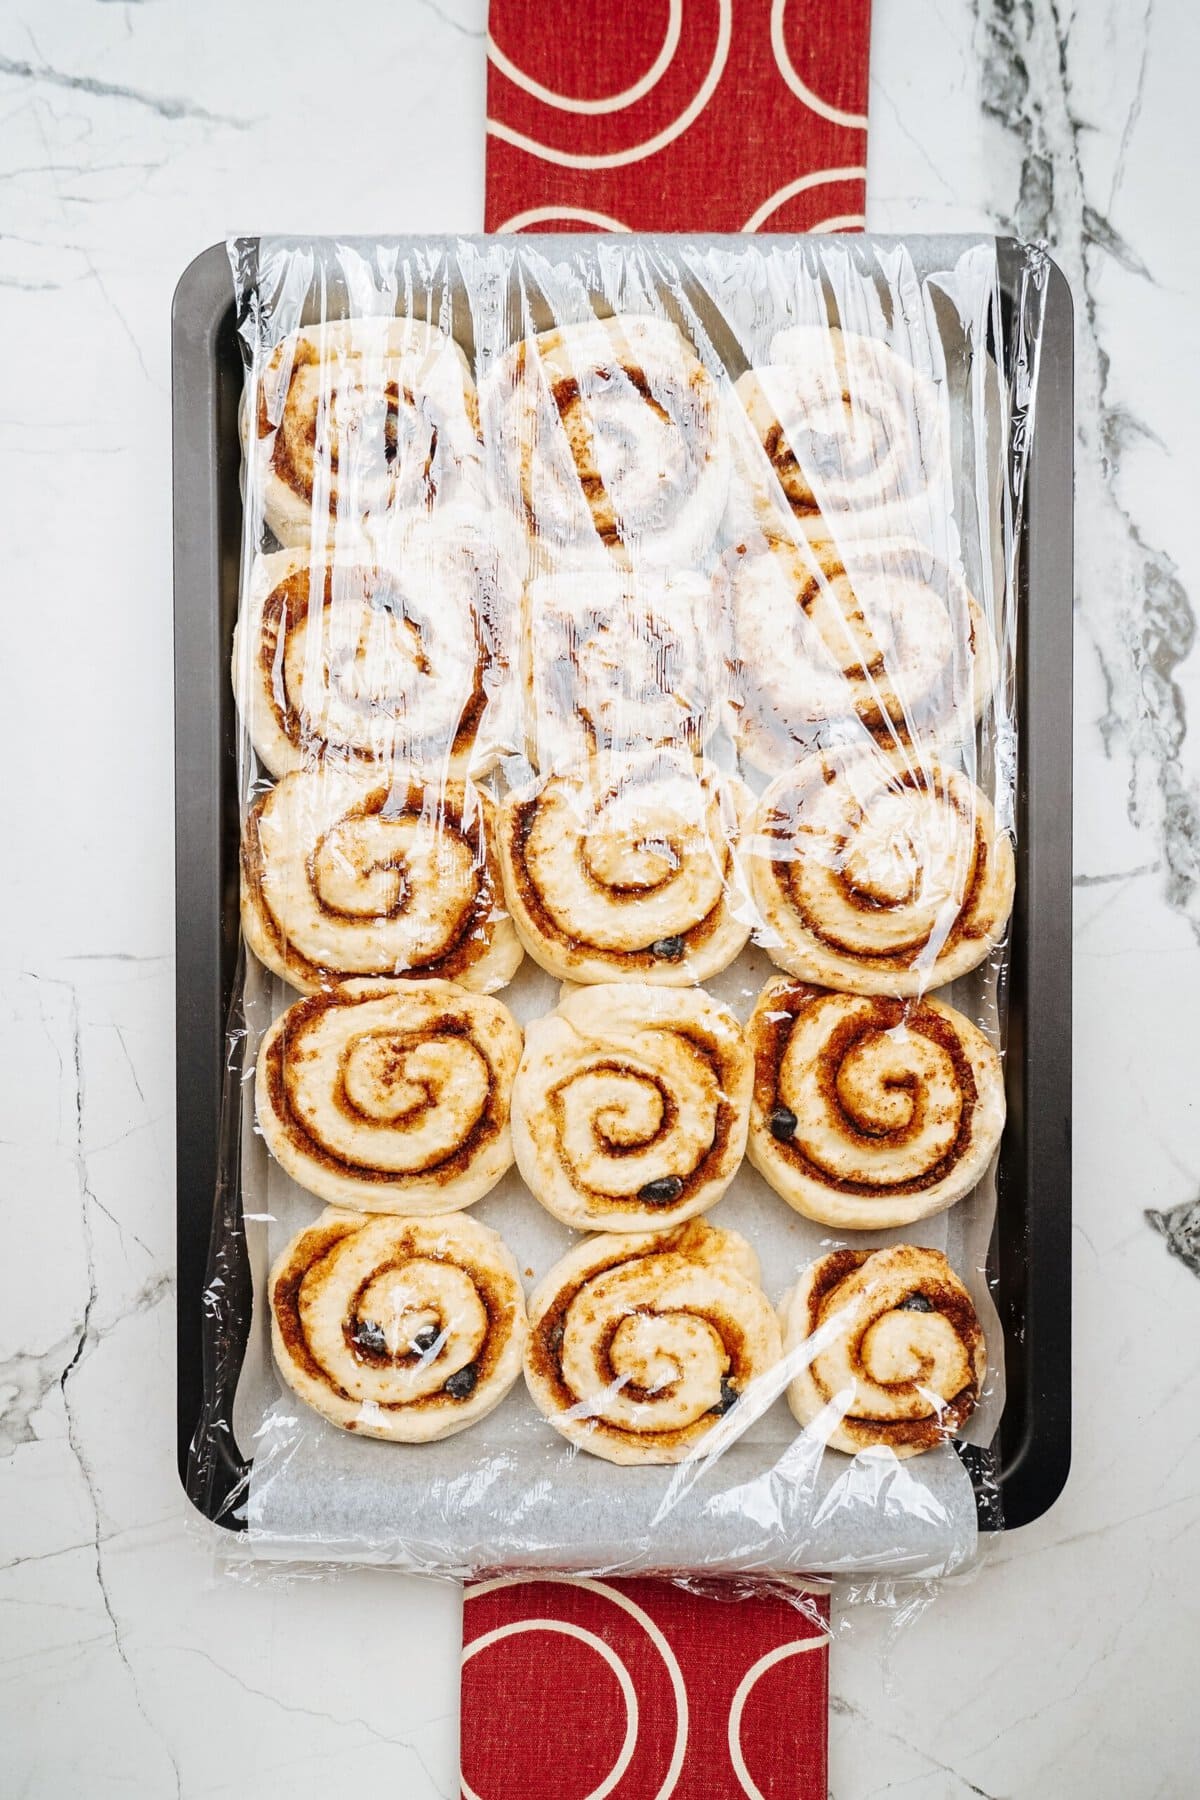 A baking sheet with a dozen uncooked cinnamon rolls sits on a marble countertop, each roll carefully covered in plastic wrap.